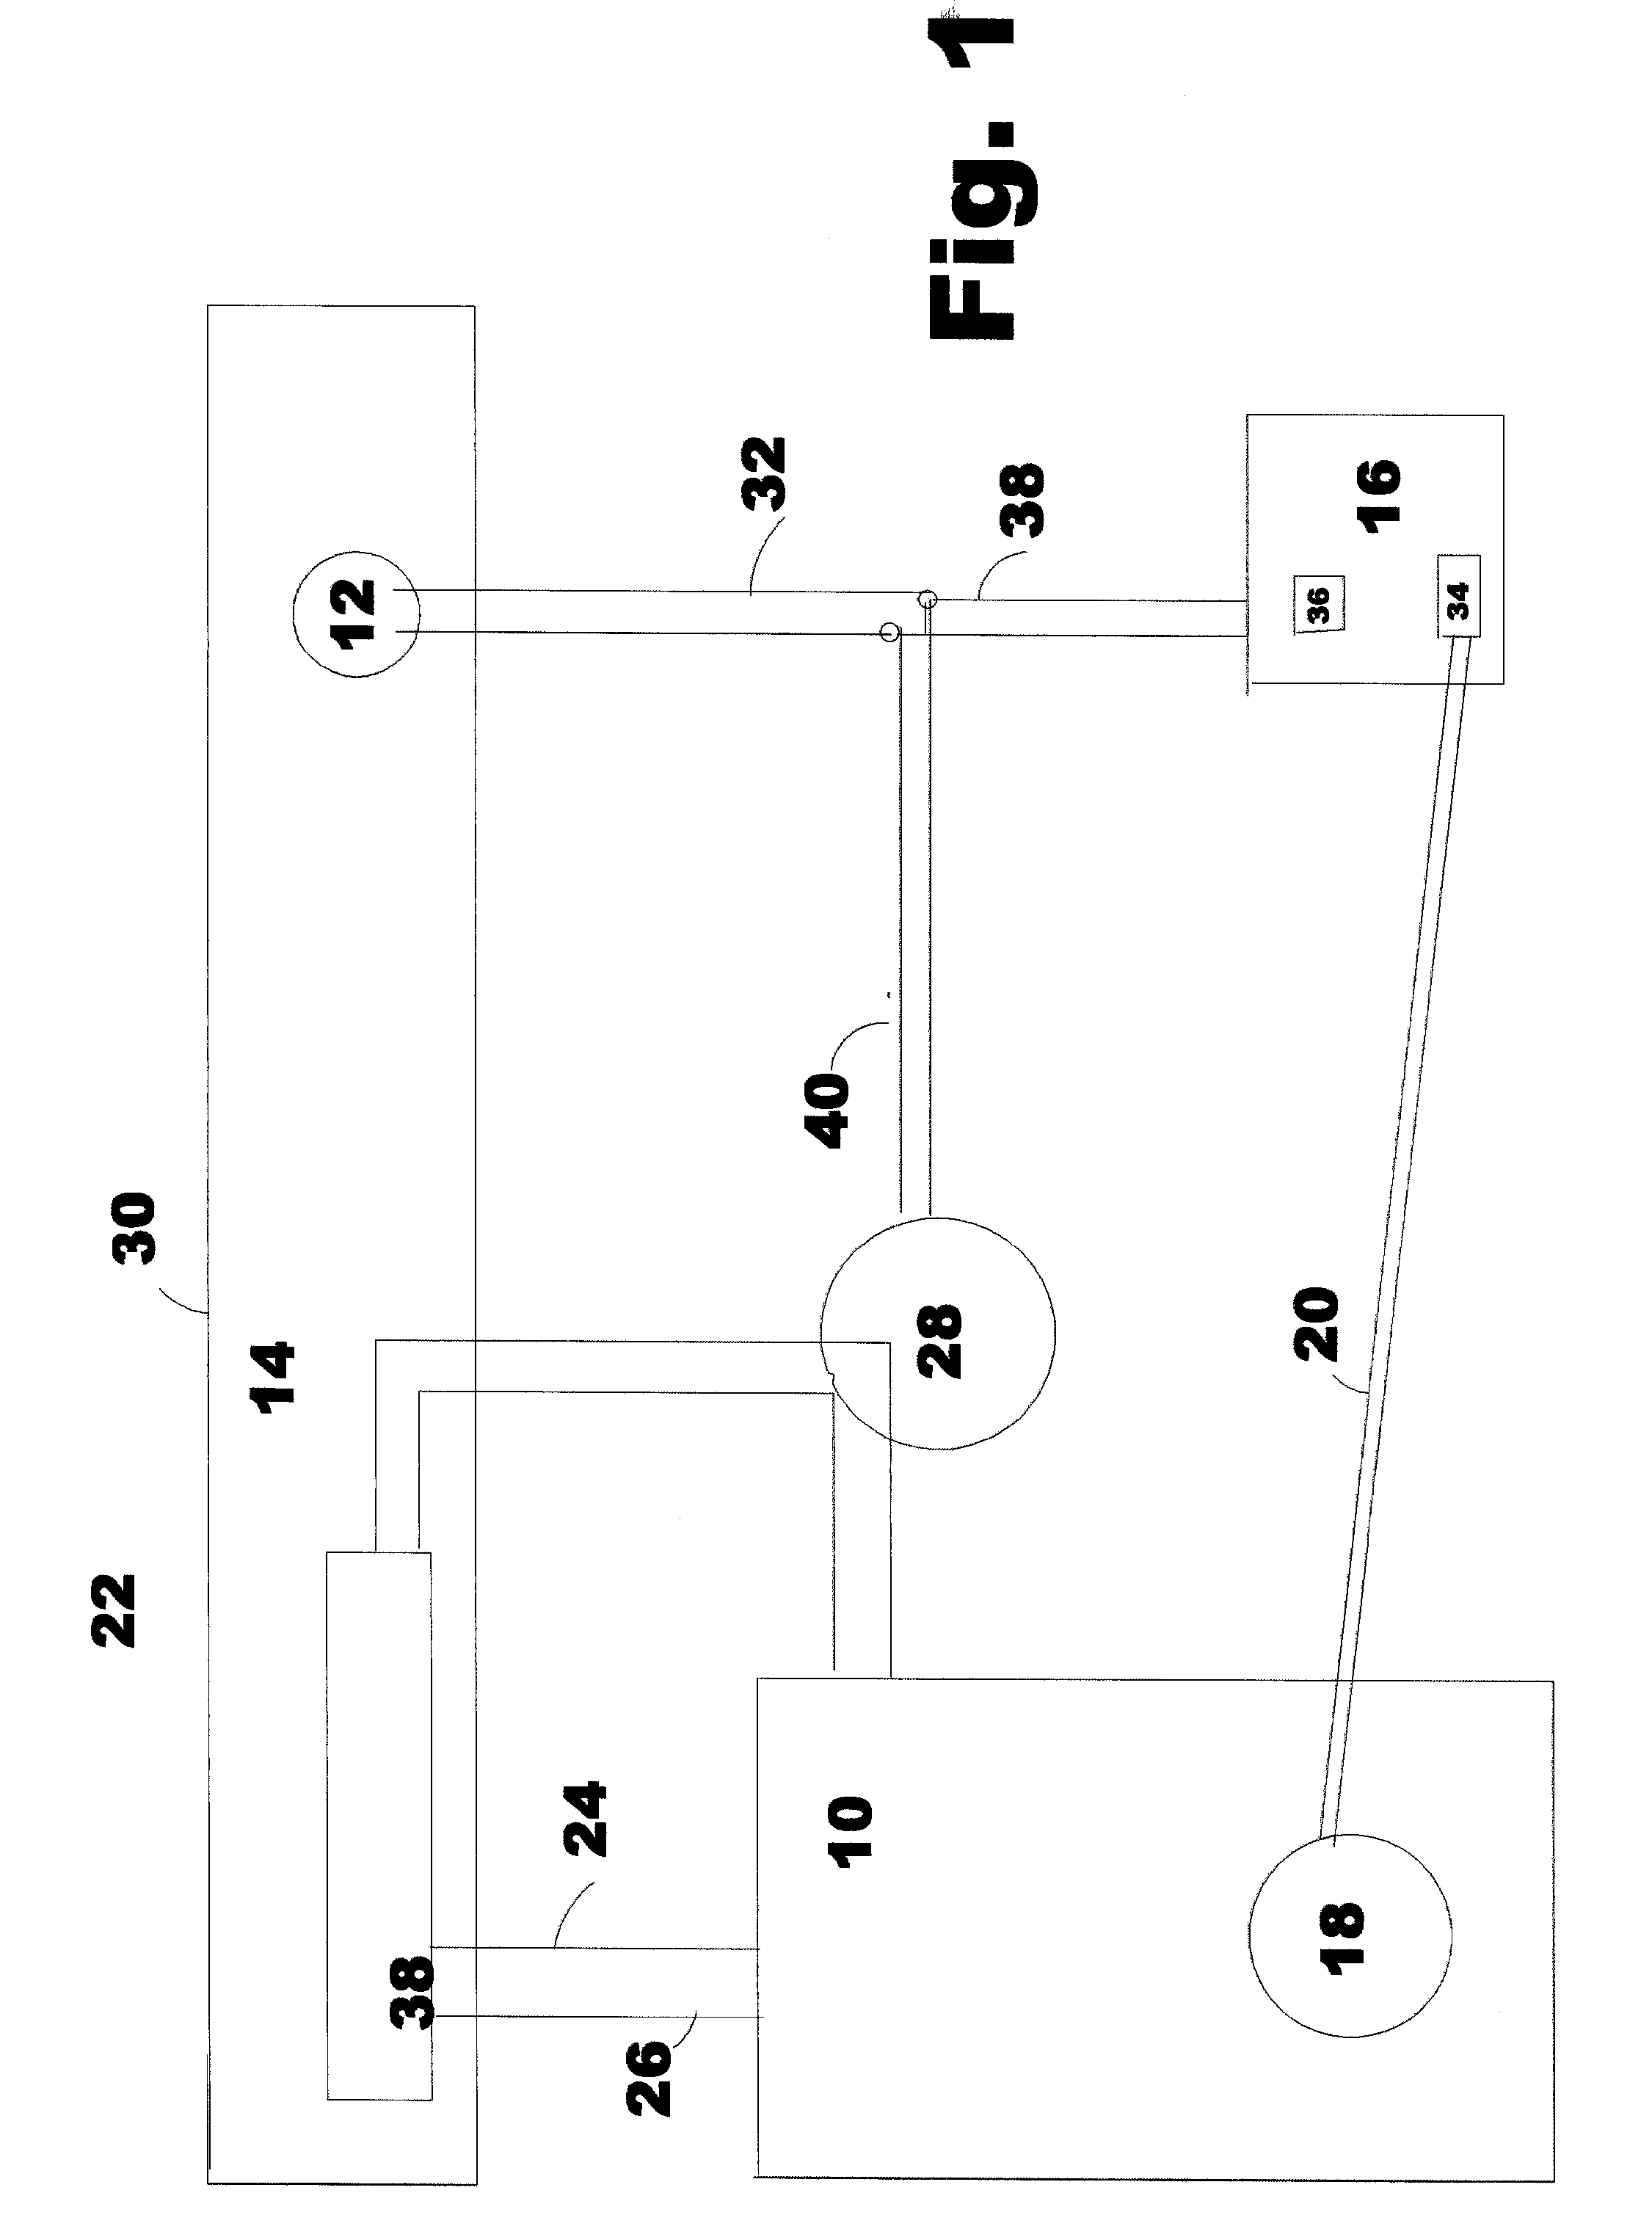 Method for Controlling HVAC Systems